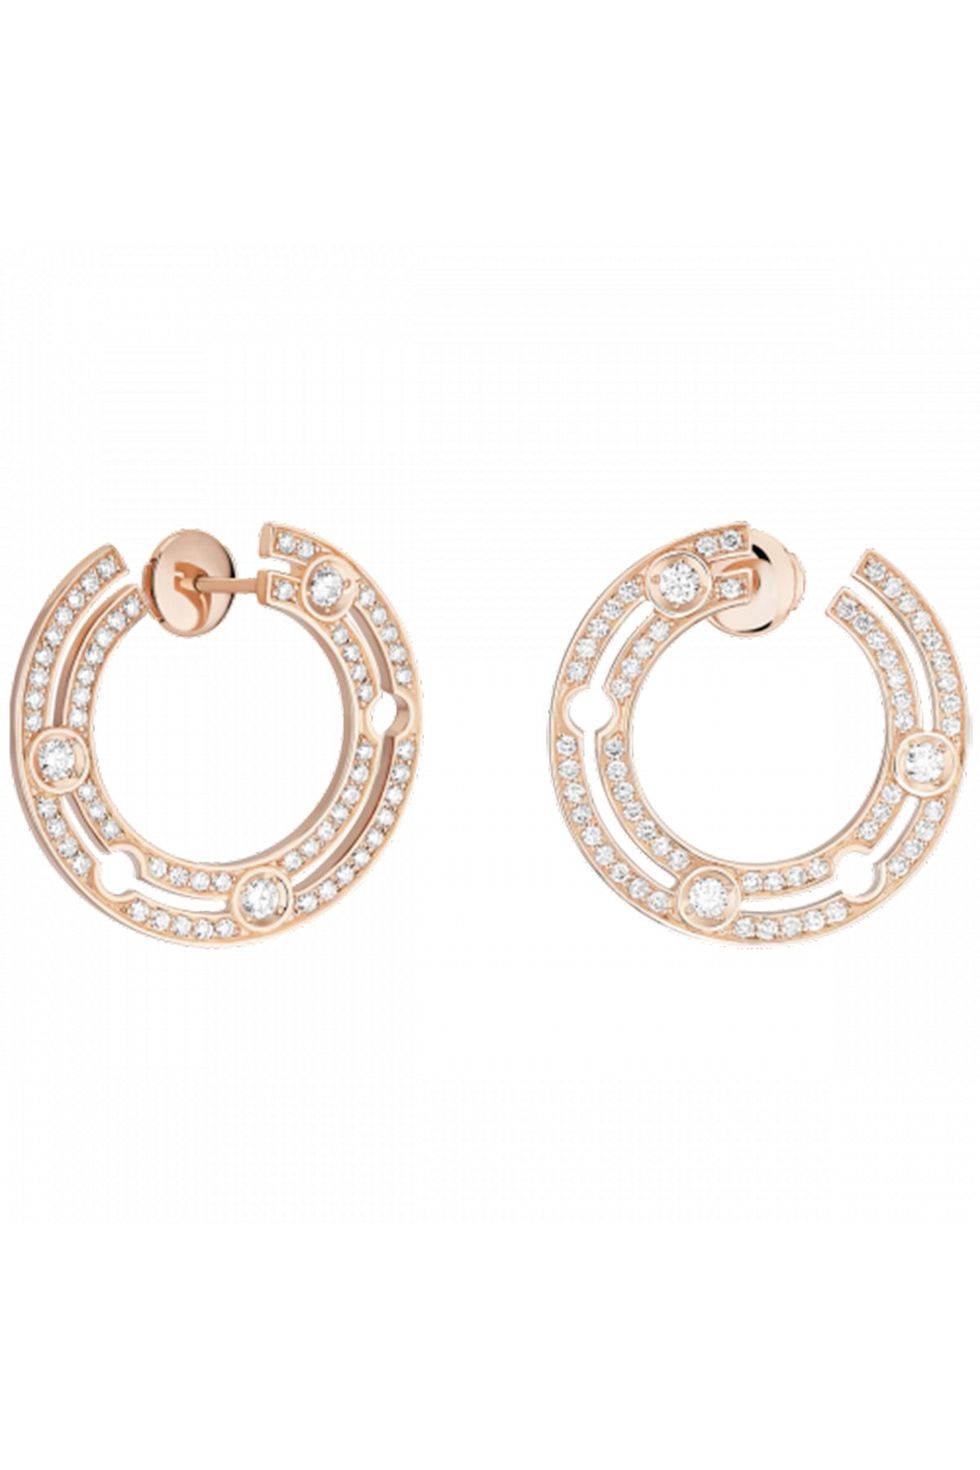 Idylle Blossom Hoops, Pink Gold And Diamonds - Jewelry